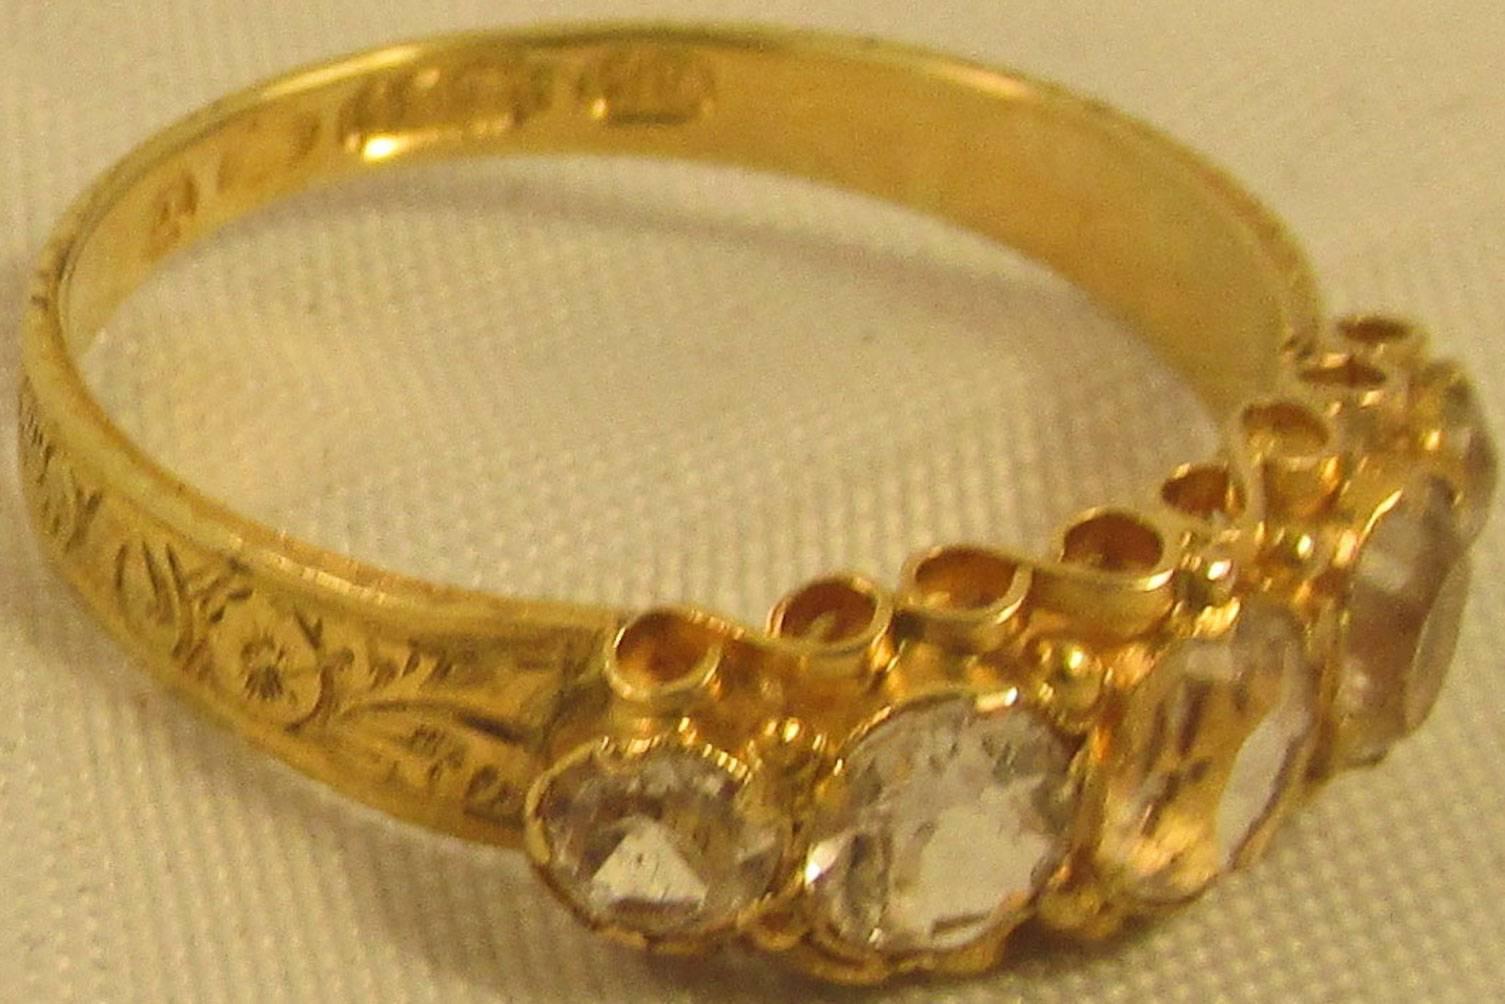 Wonderful Victorian 18K five stone diamond ring hallmarked Birmingham, C1880. The elaborate setting is enhanced by an ornately carved gold shank. Beautiful to wear alone or stacked with other rings. It is a size 6.5.    